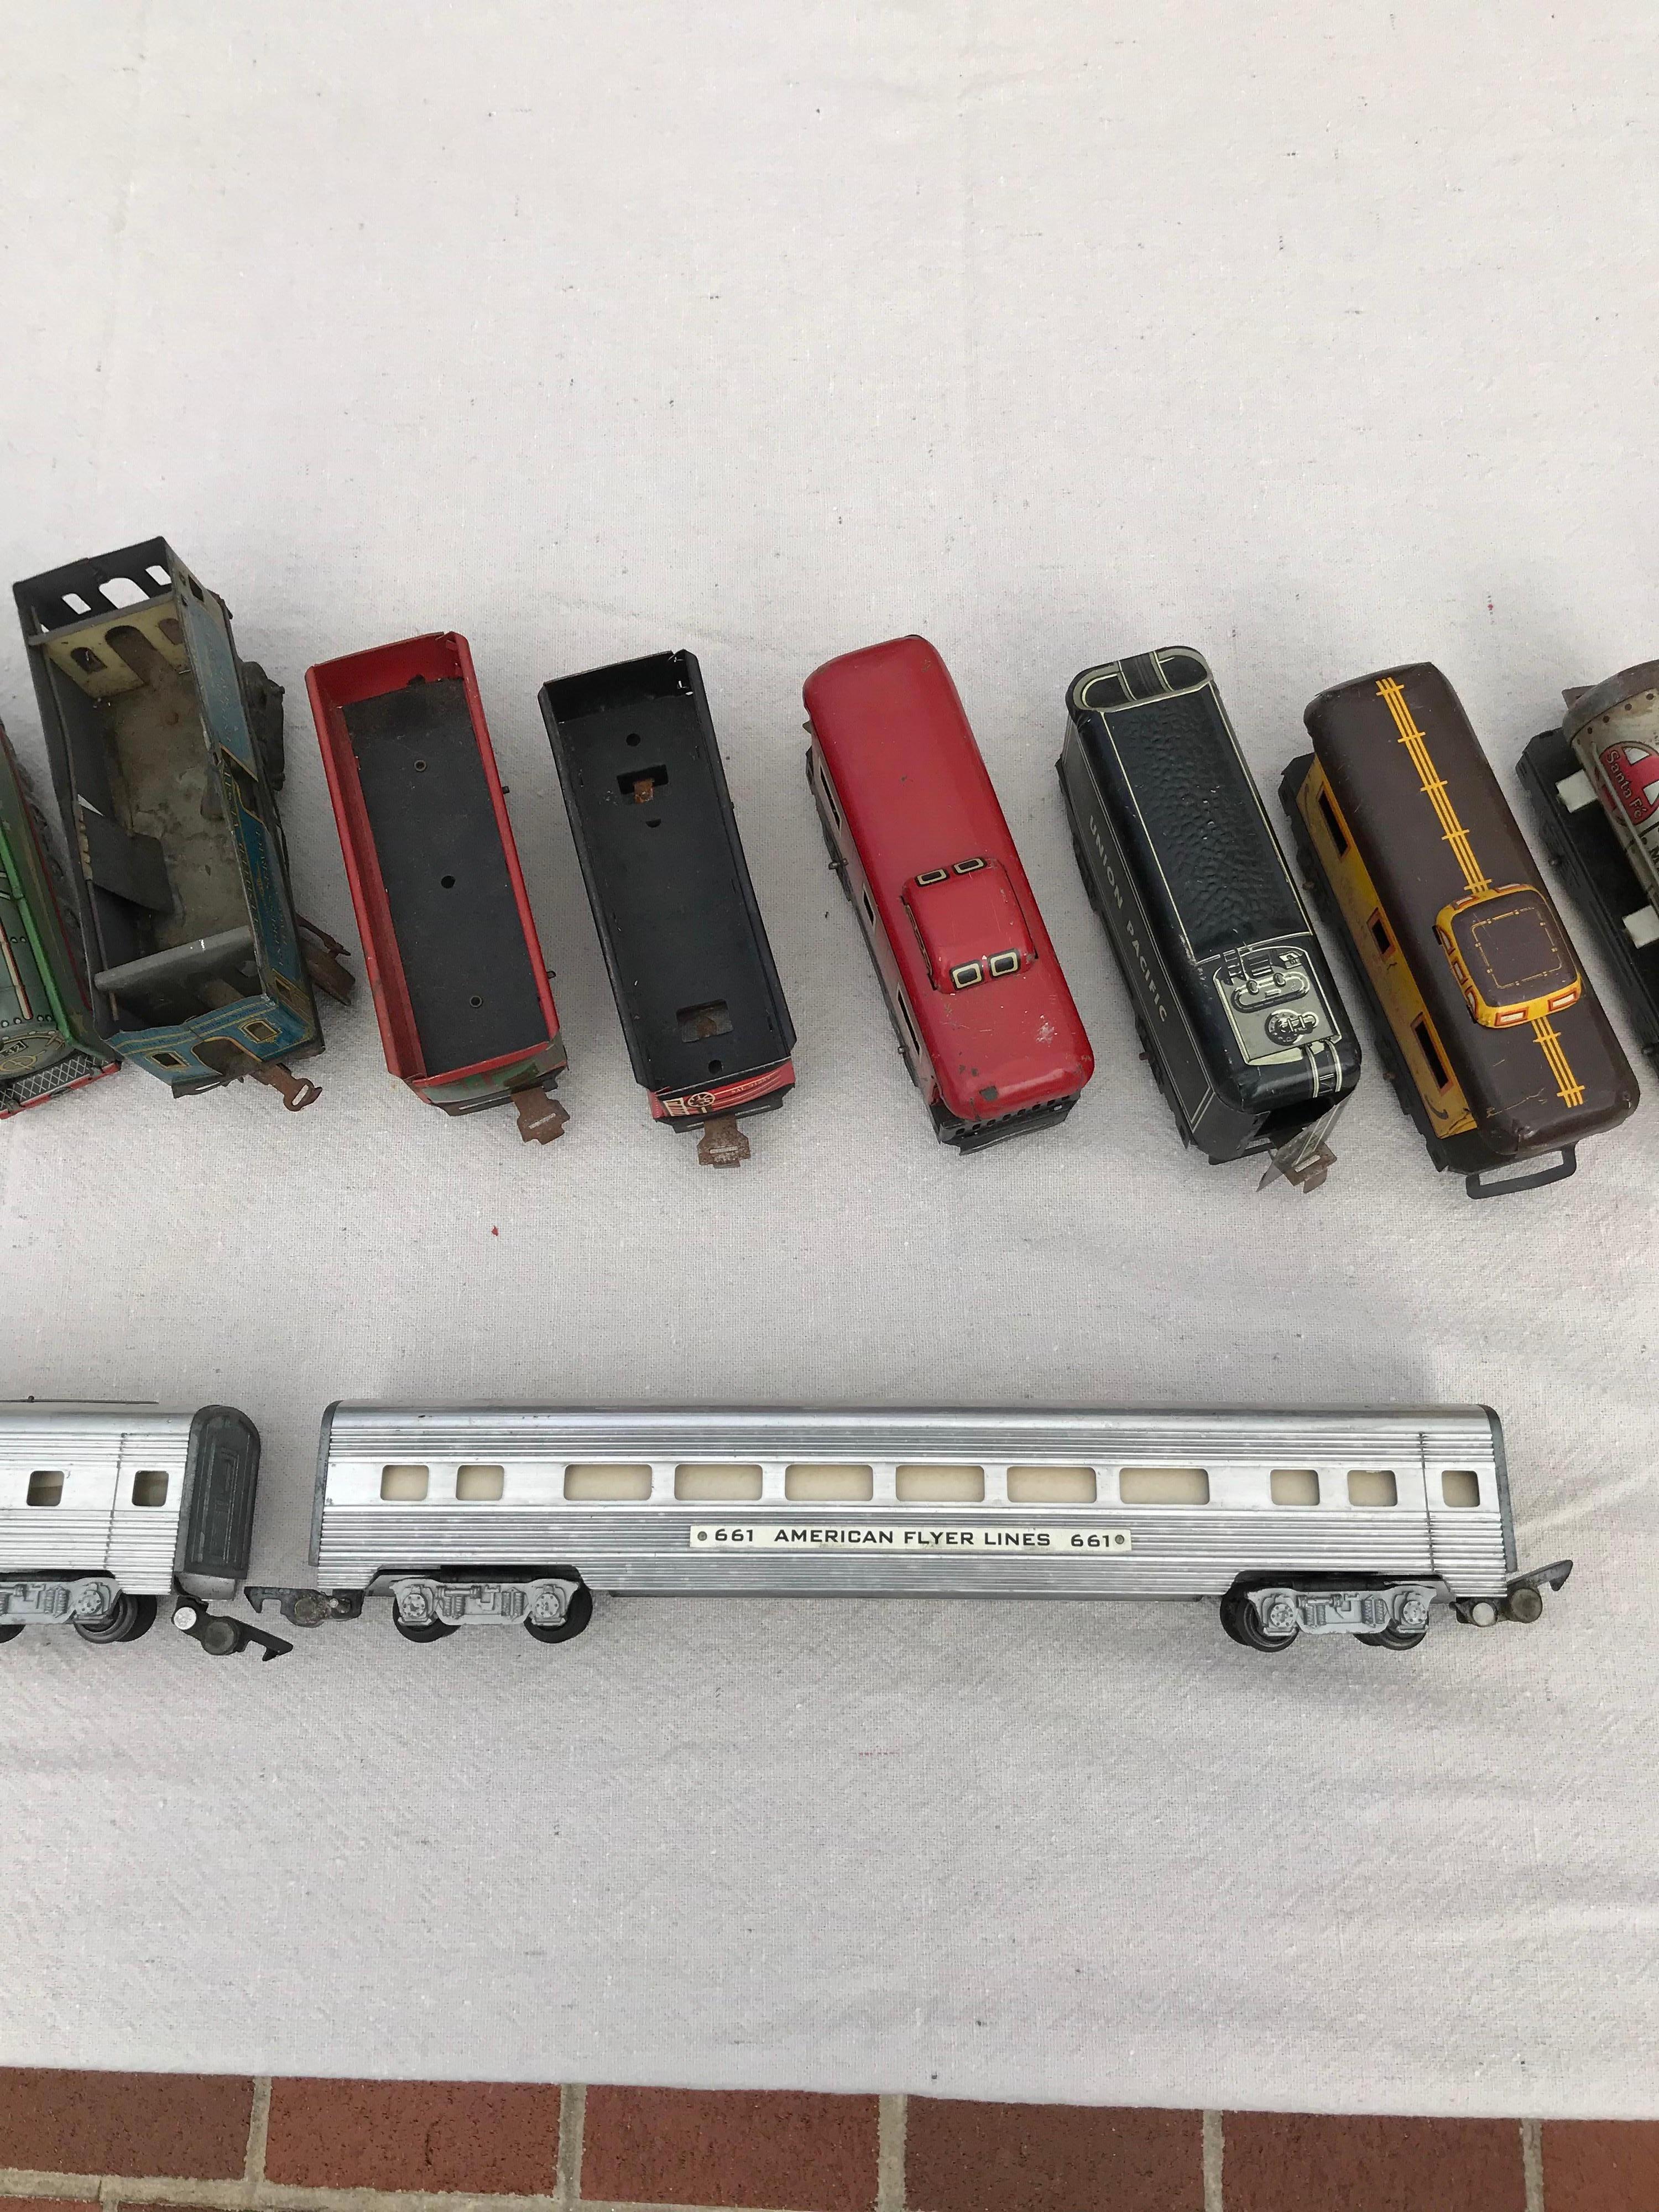 Collection of antique trains. It includes two 1950s American Flyer streamline aluminum trains. One engine and one pull car. Some are Lionel Trains and some are by Marx. We can send more detailed photos if interested. Great gift of 15 trains for that